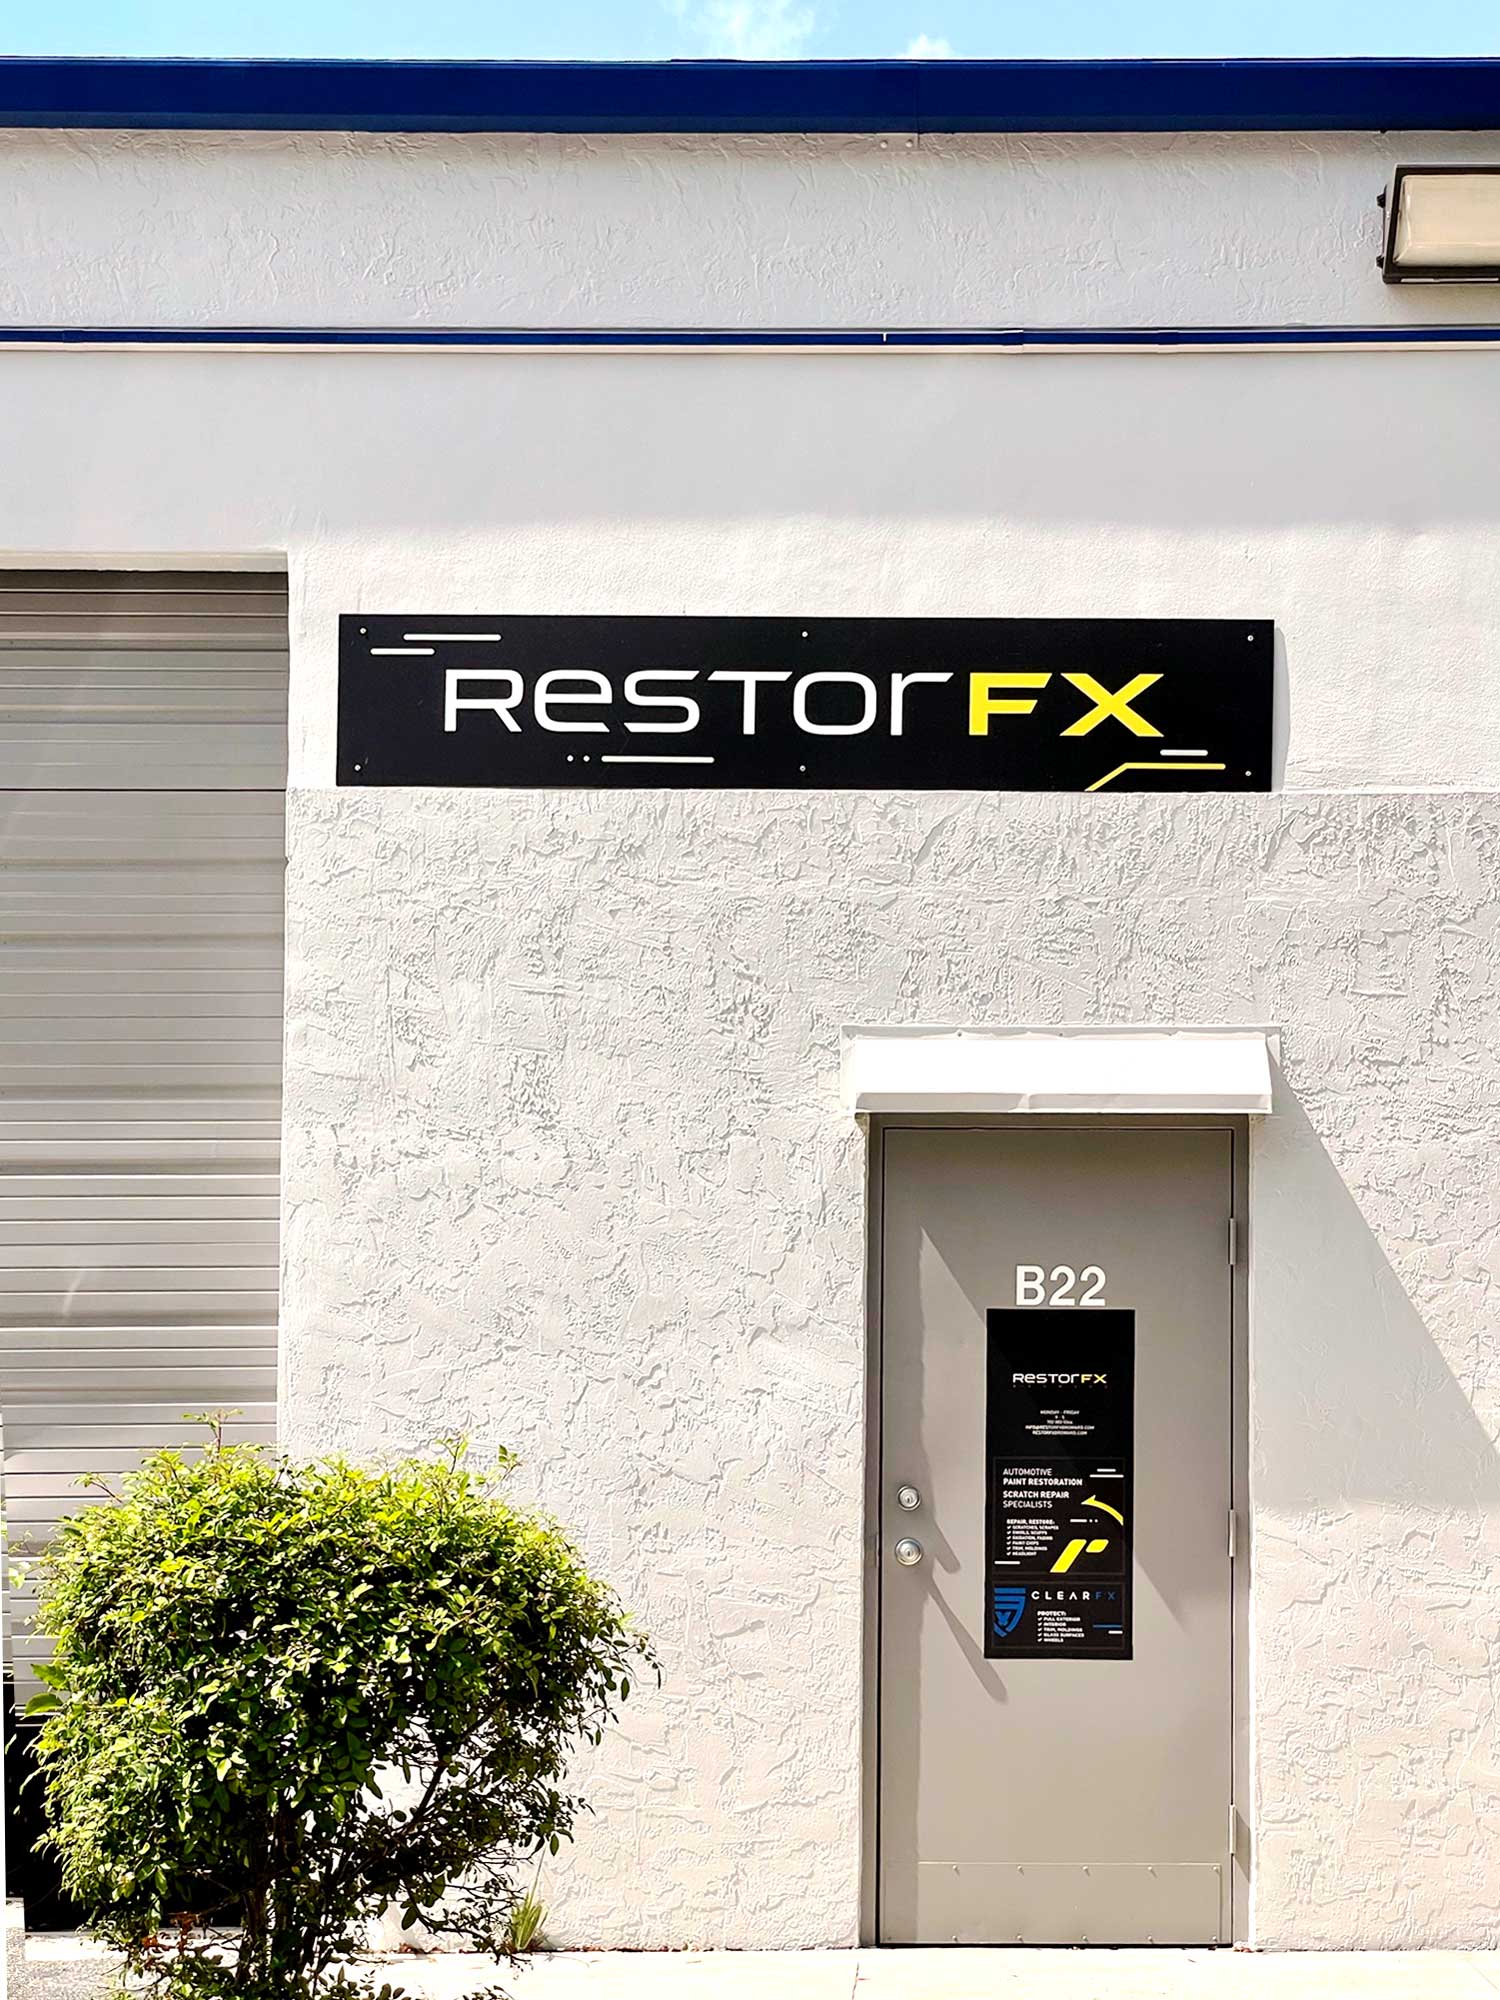 RestorFX Broward storefront with white walls, branded signage and entrance next to garage door